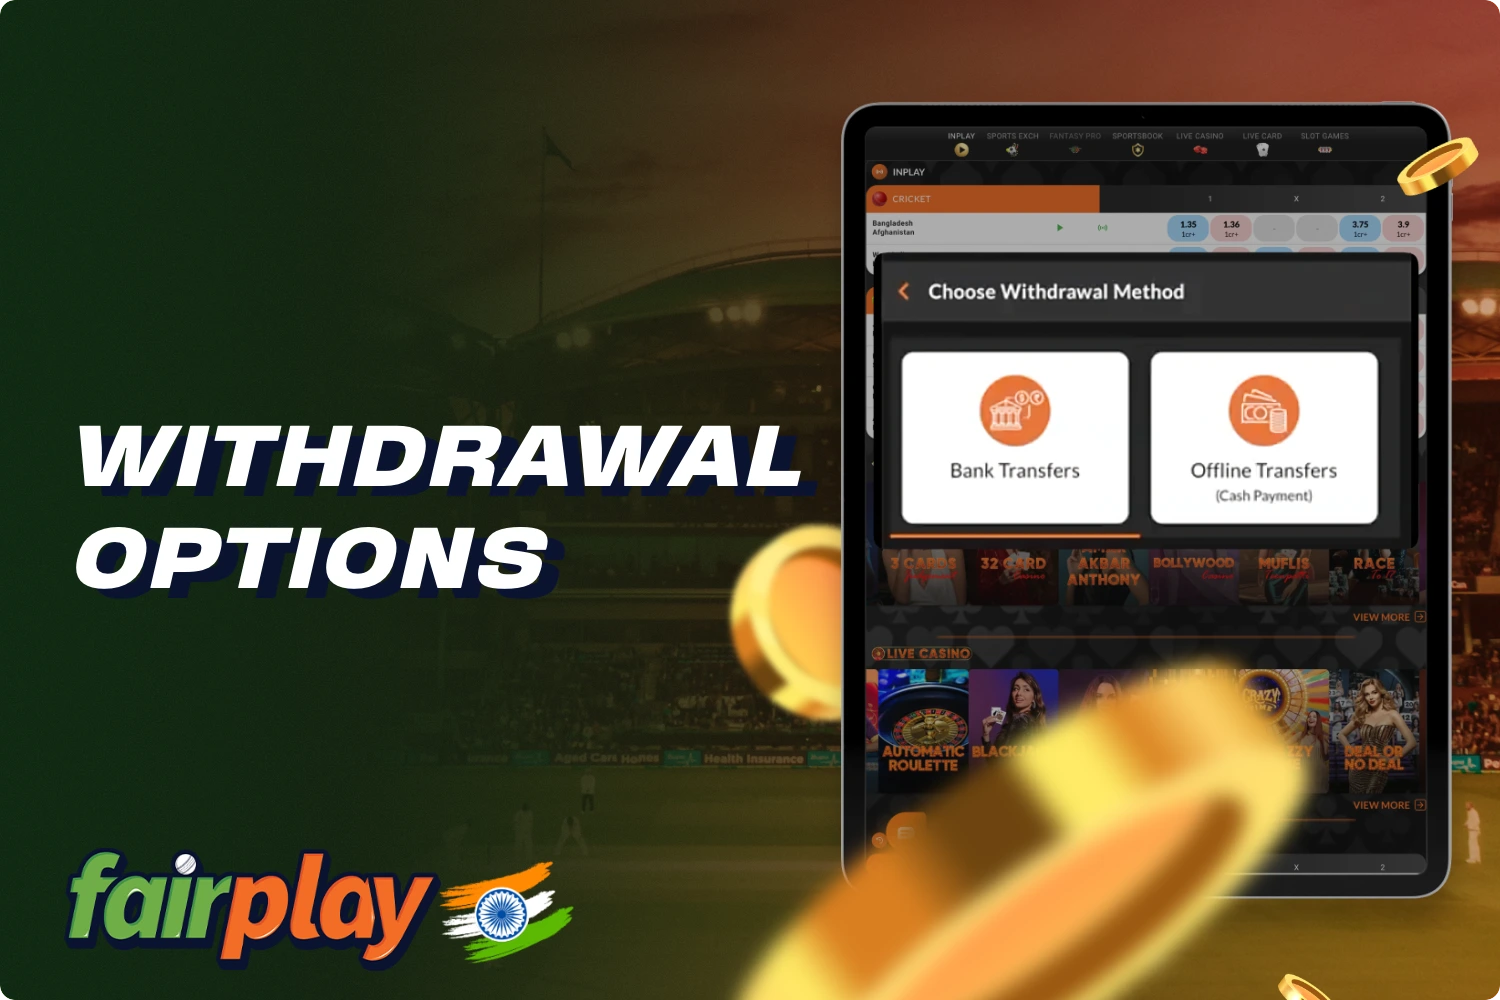 Indian users can withdraw their winnings from Fairplay using one of the available withdrawal methods